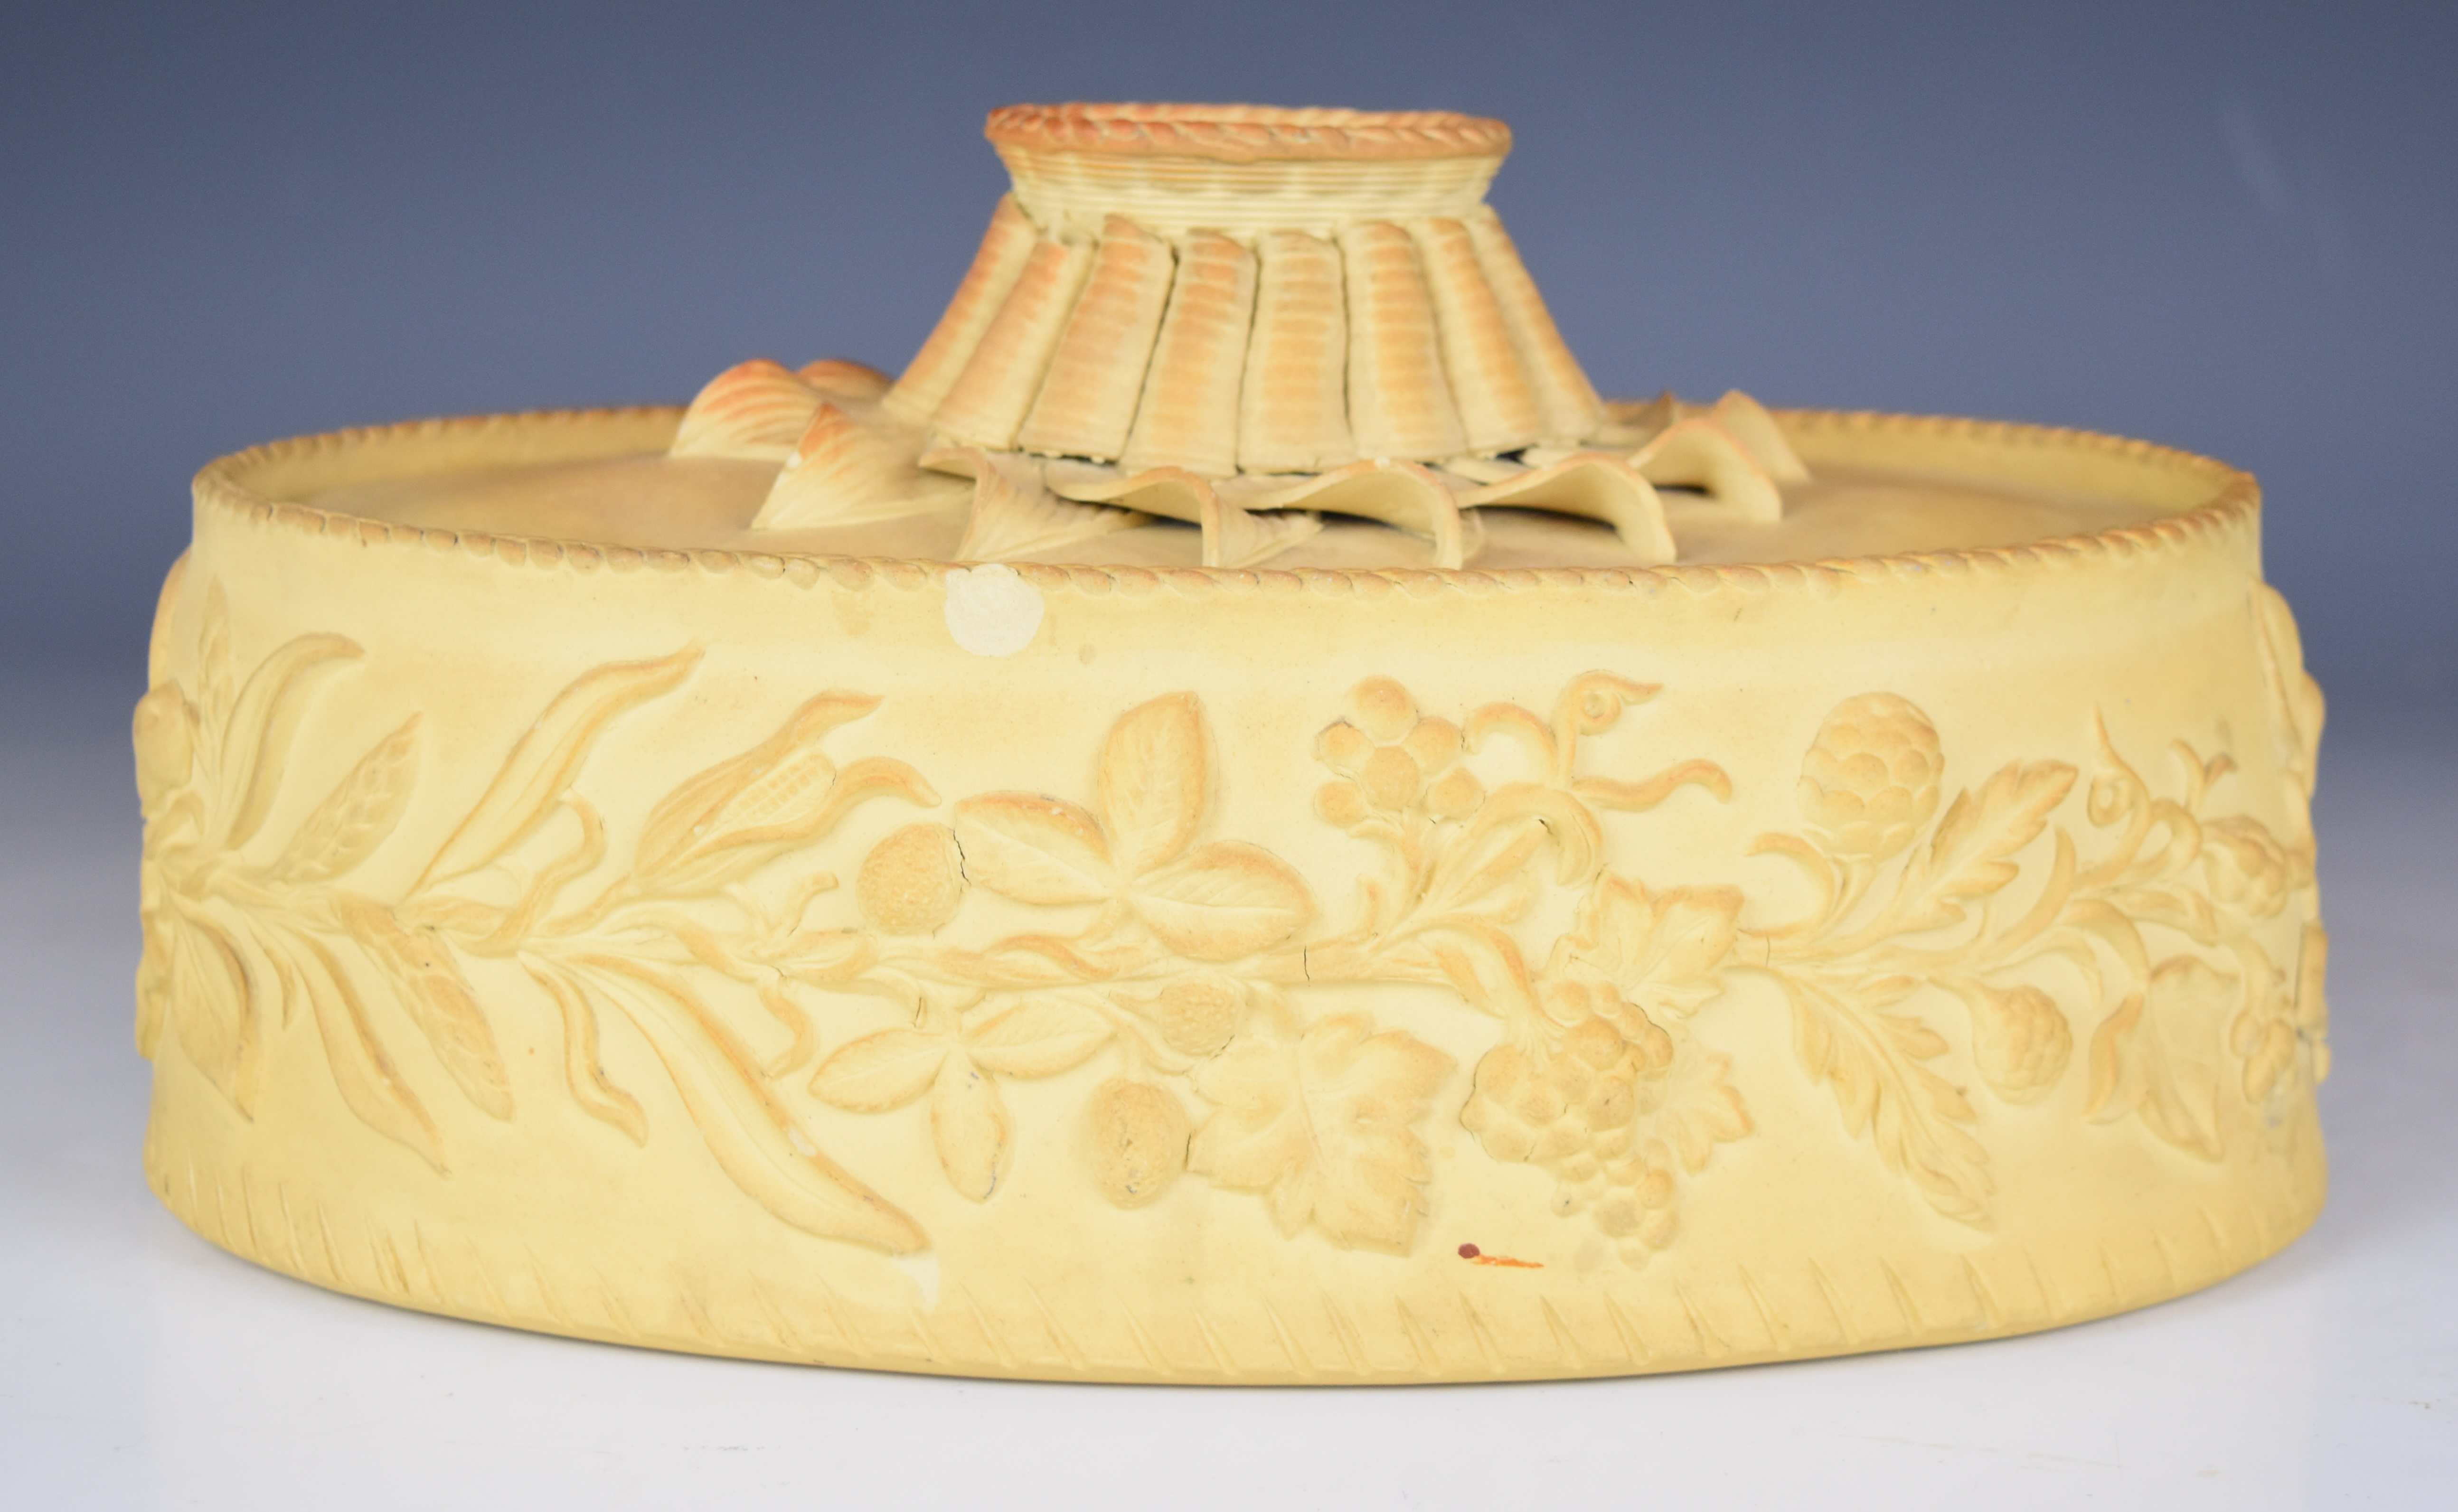 19thC caneware game pie dish and cover with decoration in relief and ornate flower petal finial, L26 - Image 6 of 10